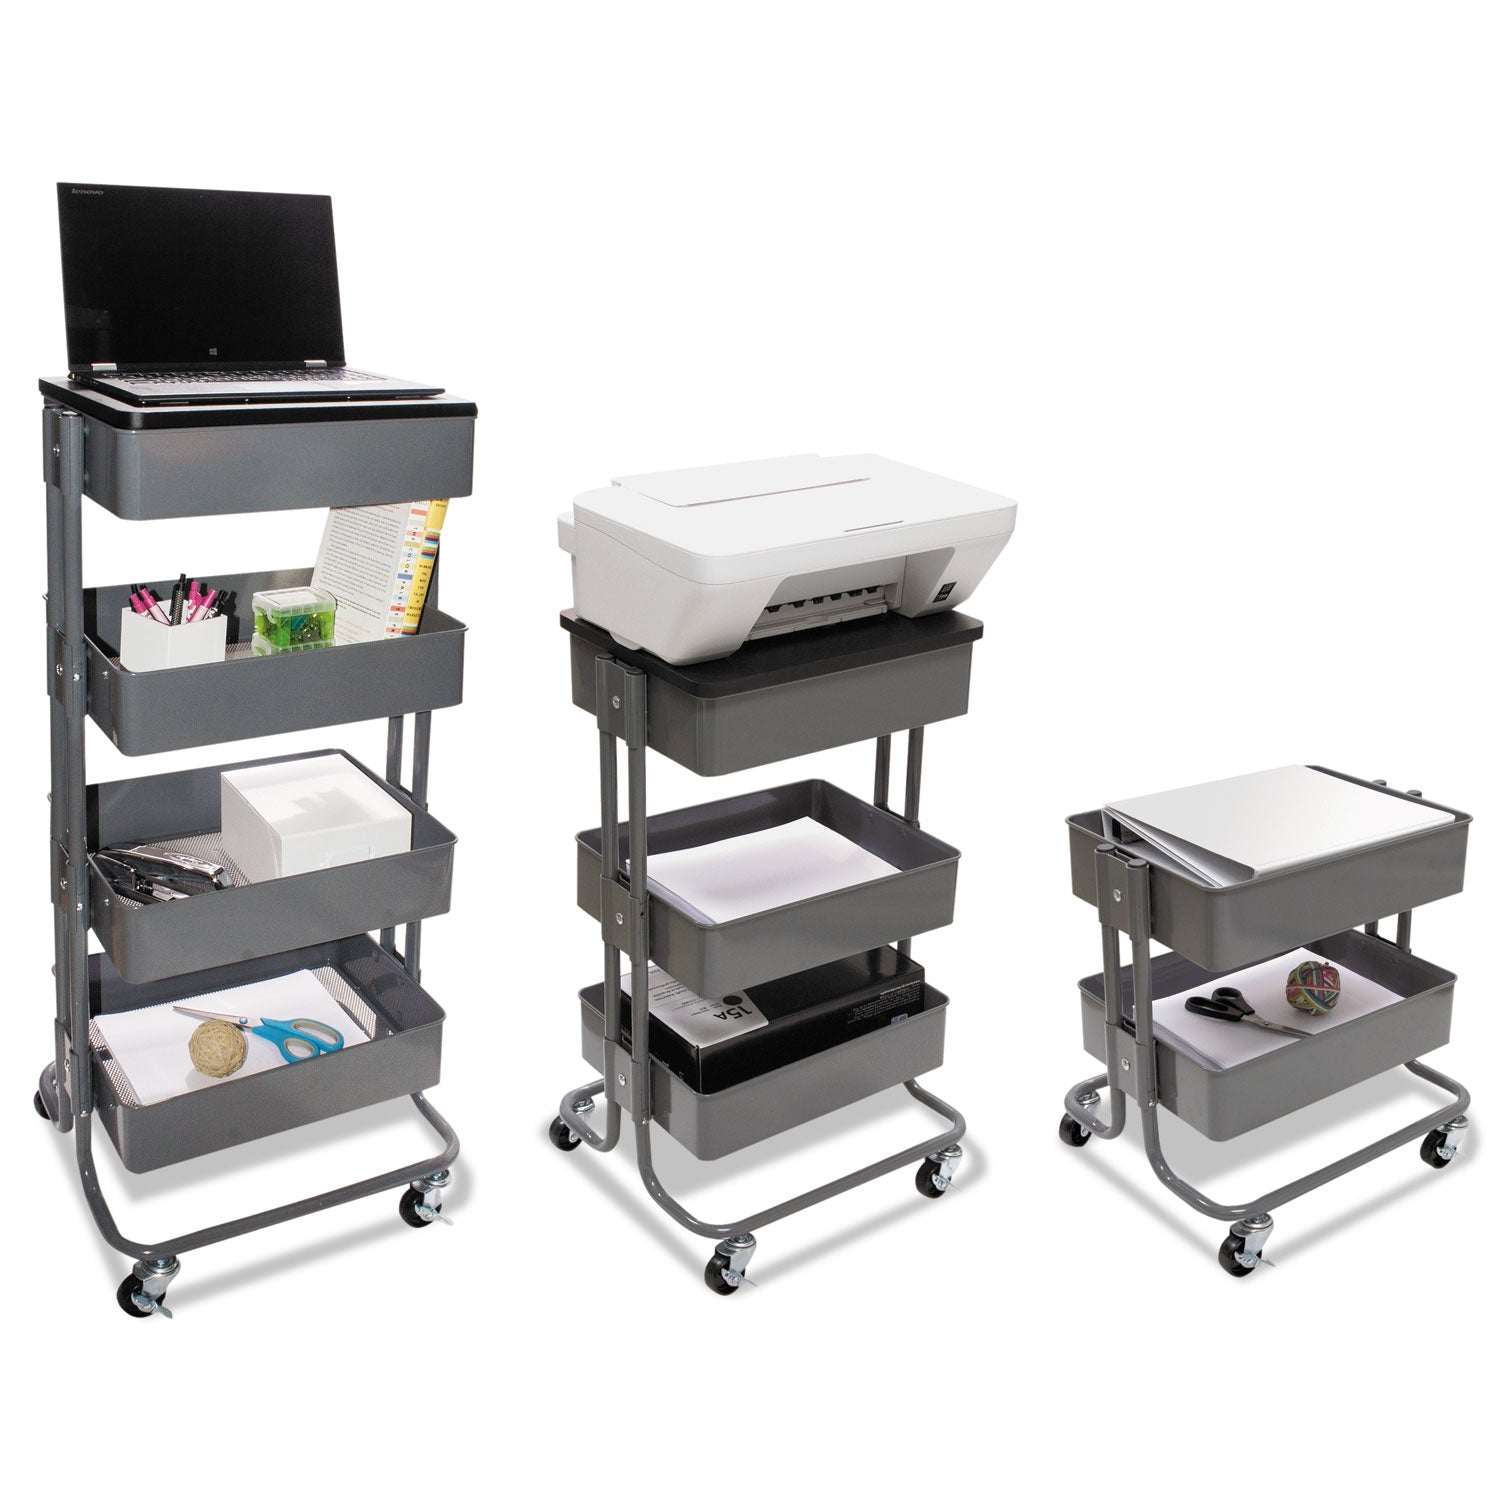 adjustable-multi-use-storage-cart-and-stand-up-workstation-1525-x-11-x-185-to-39-gray_vrtvf51025 - 2